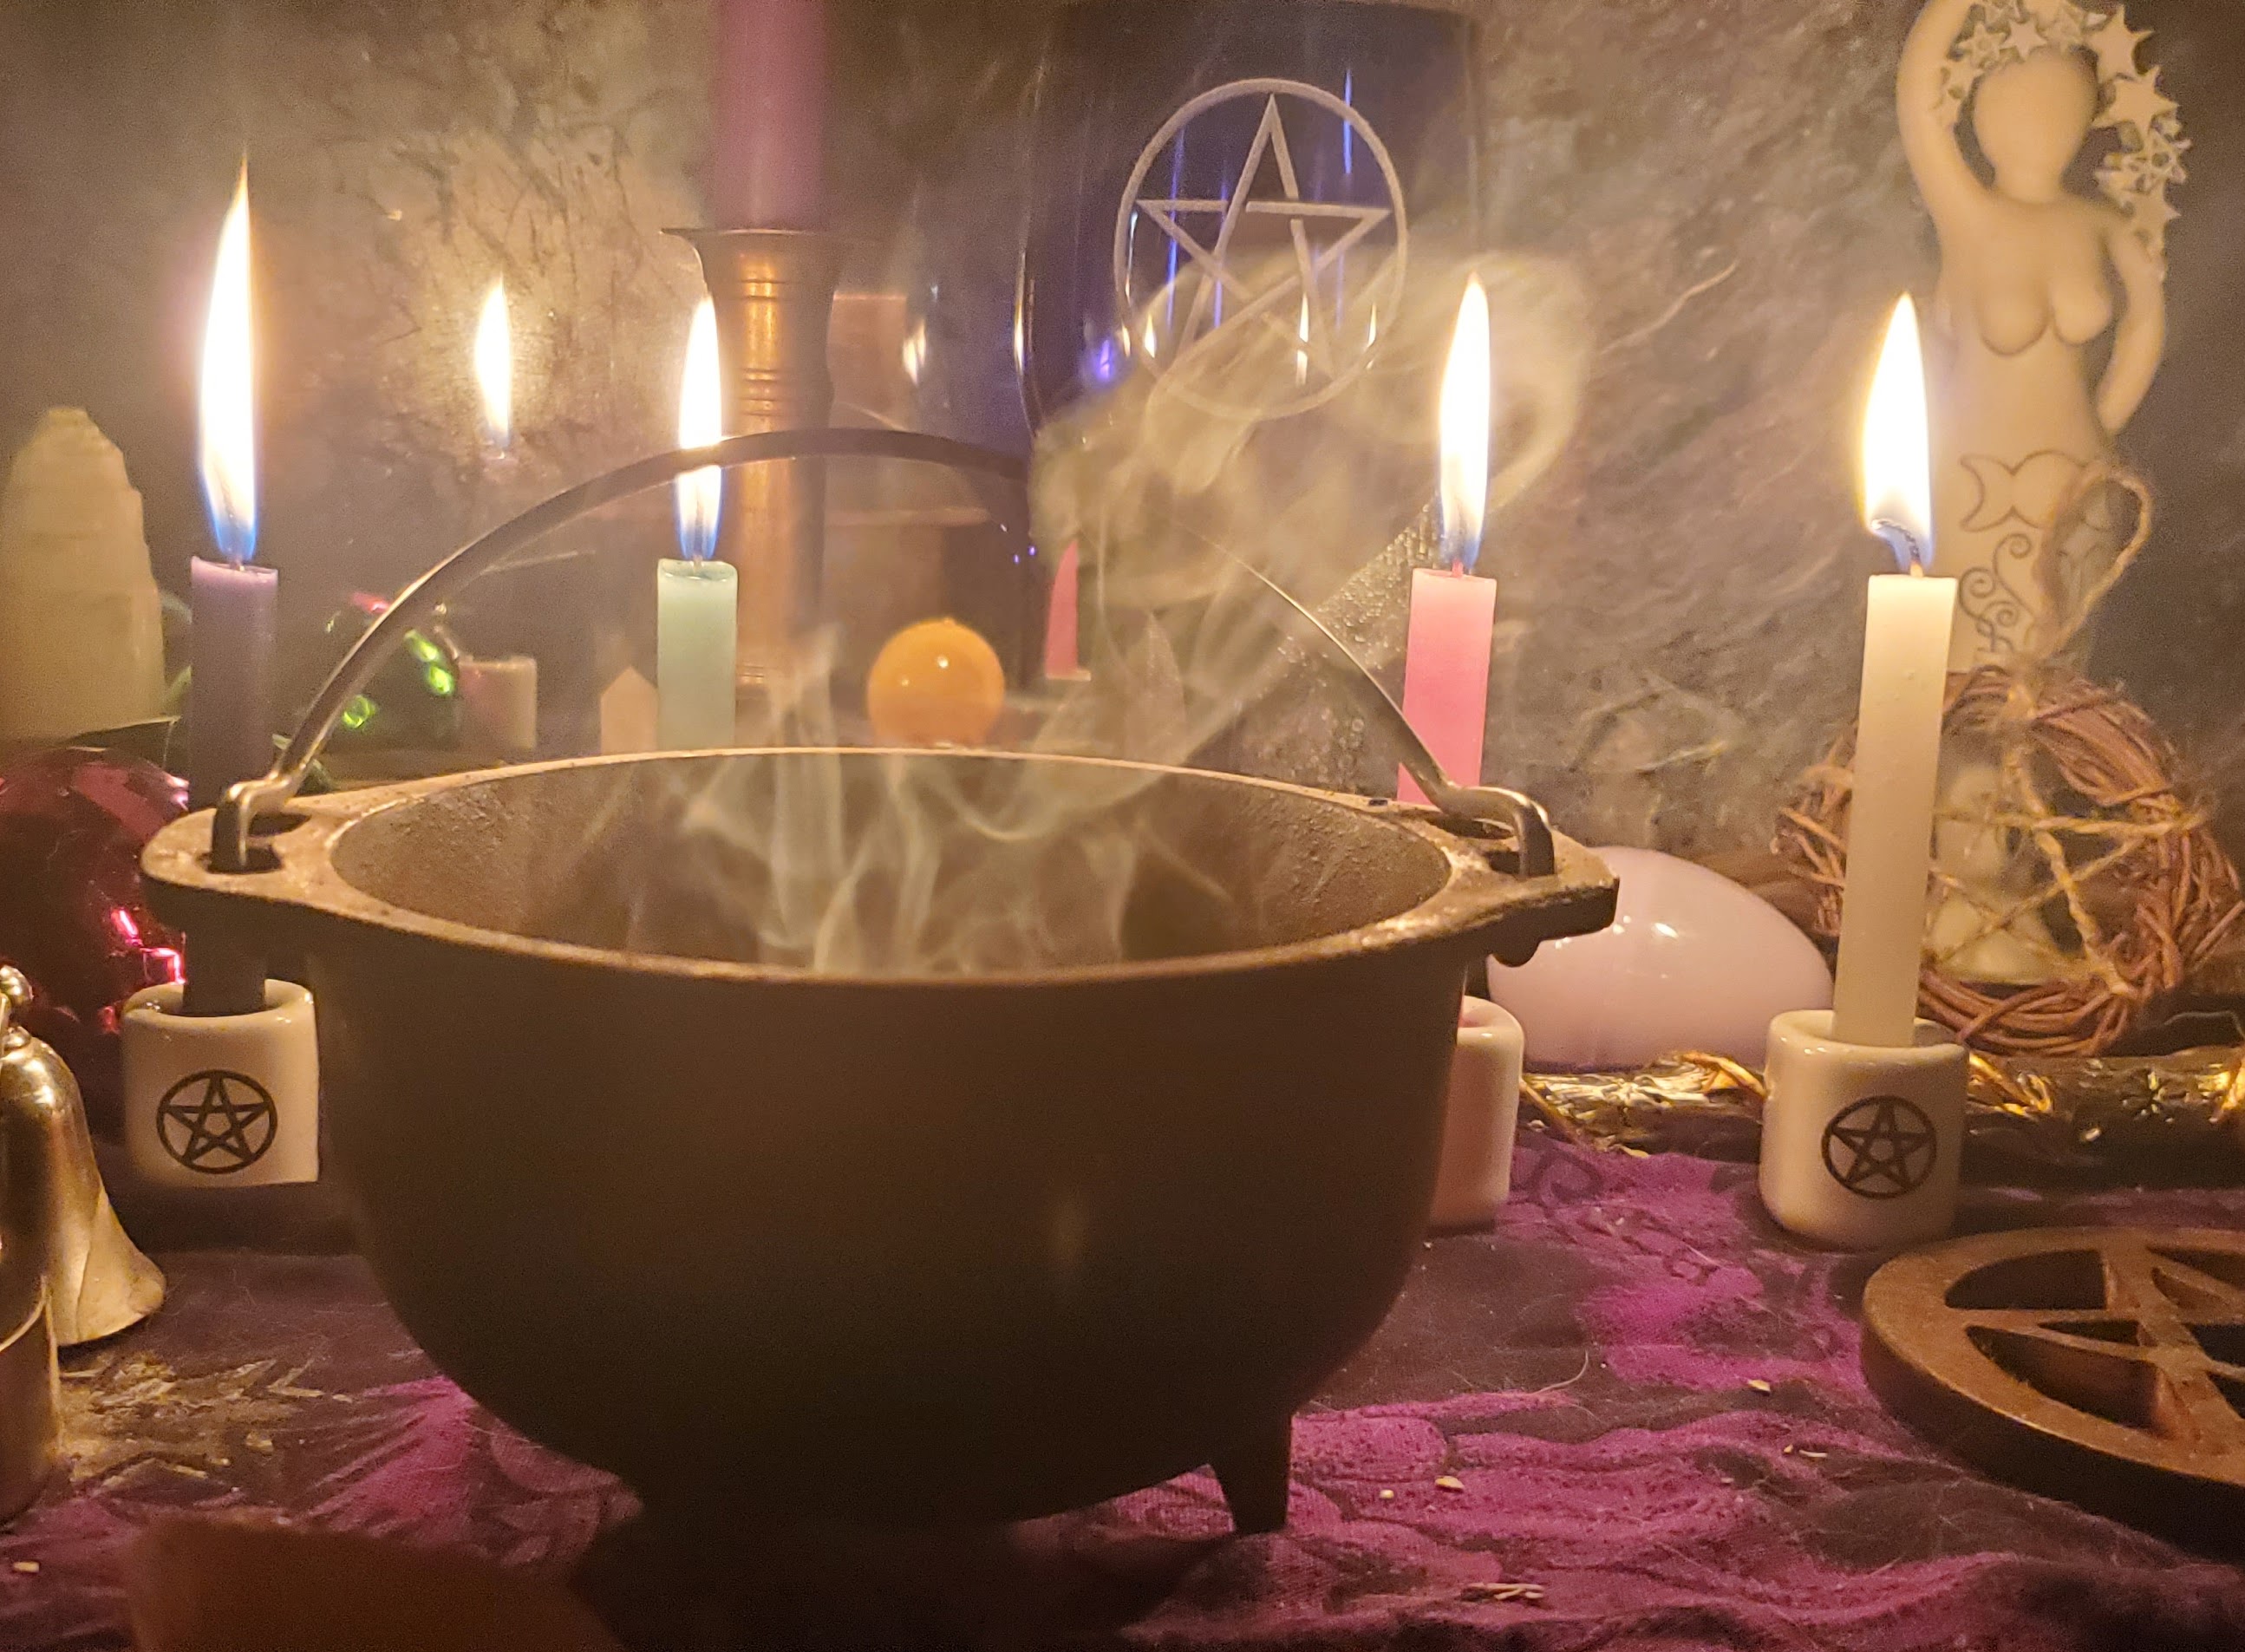 Di's cauldron smoking with candles lit behind it, a goddess statue to the back right, a wooden pentacle center right